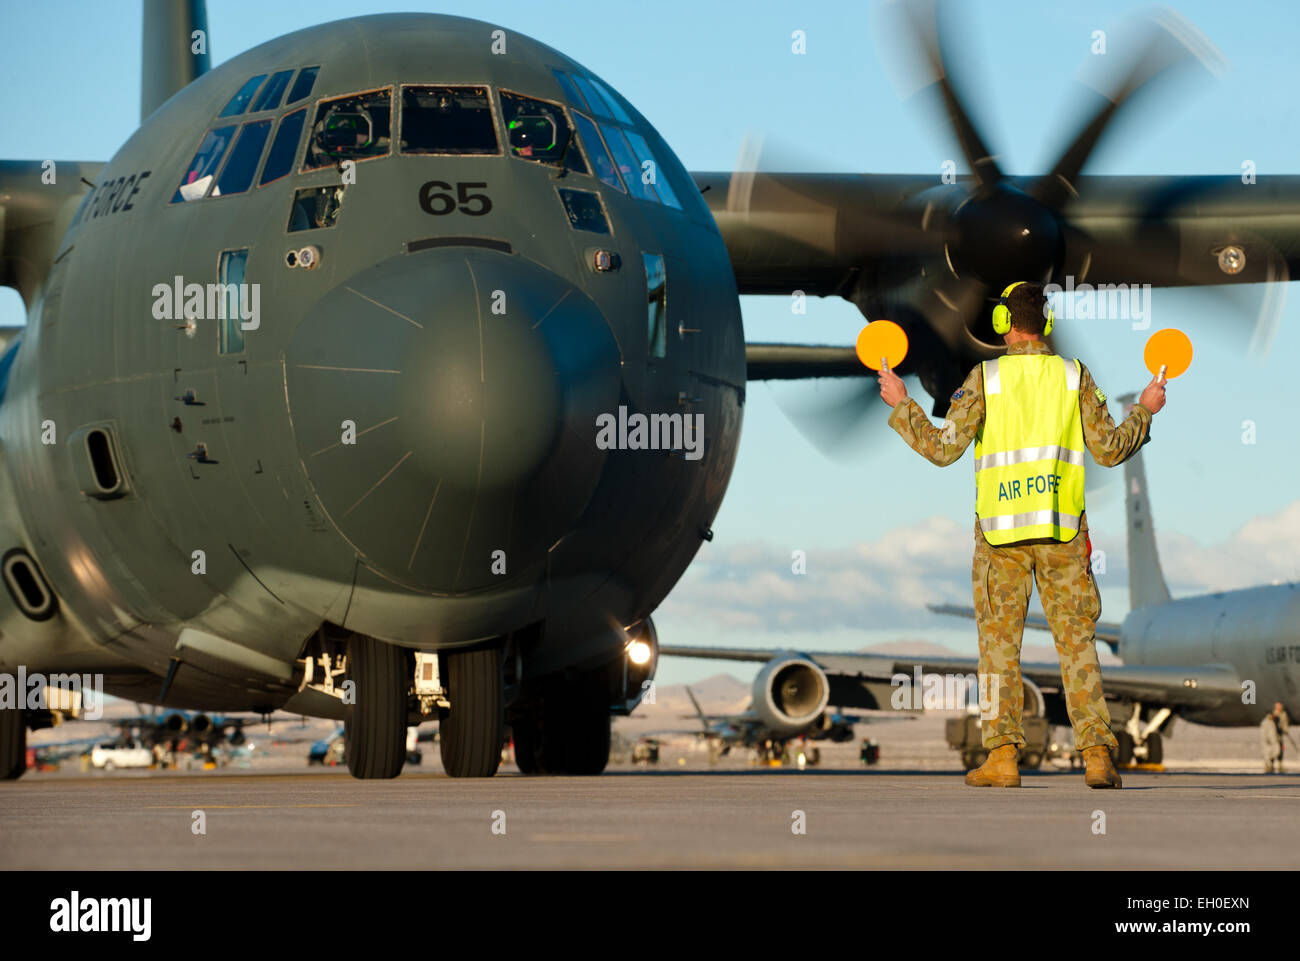 A Royal Australian air force aircraft maintainer marshals an RAAF C-130J Super Hercules into position after a training mission during Red Flag 15-1 at Nellis Air Force Base, Nev., Jan. 27, 2015. The mock battle training provided by Red Flag in the skies over the Nevada Test and Training Range has yielded results that increase the combat capability of U.S. and allied air forces for future real-world combat situations. Stock Photo